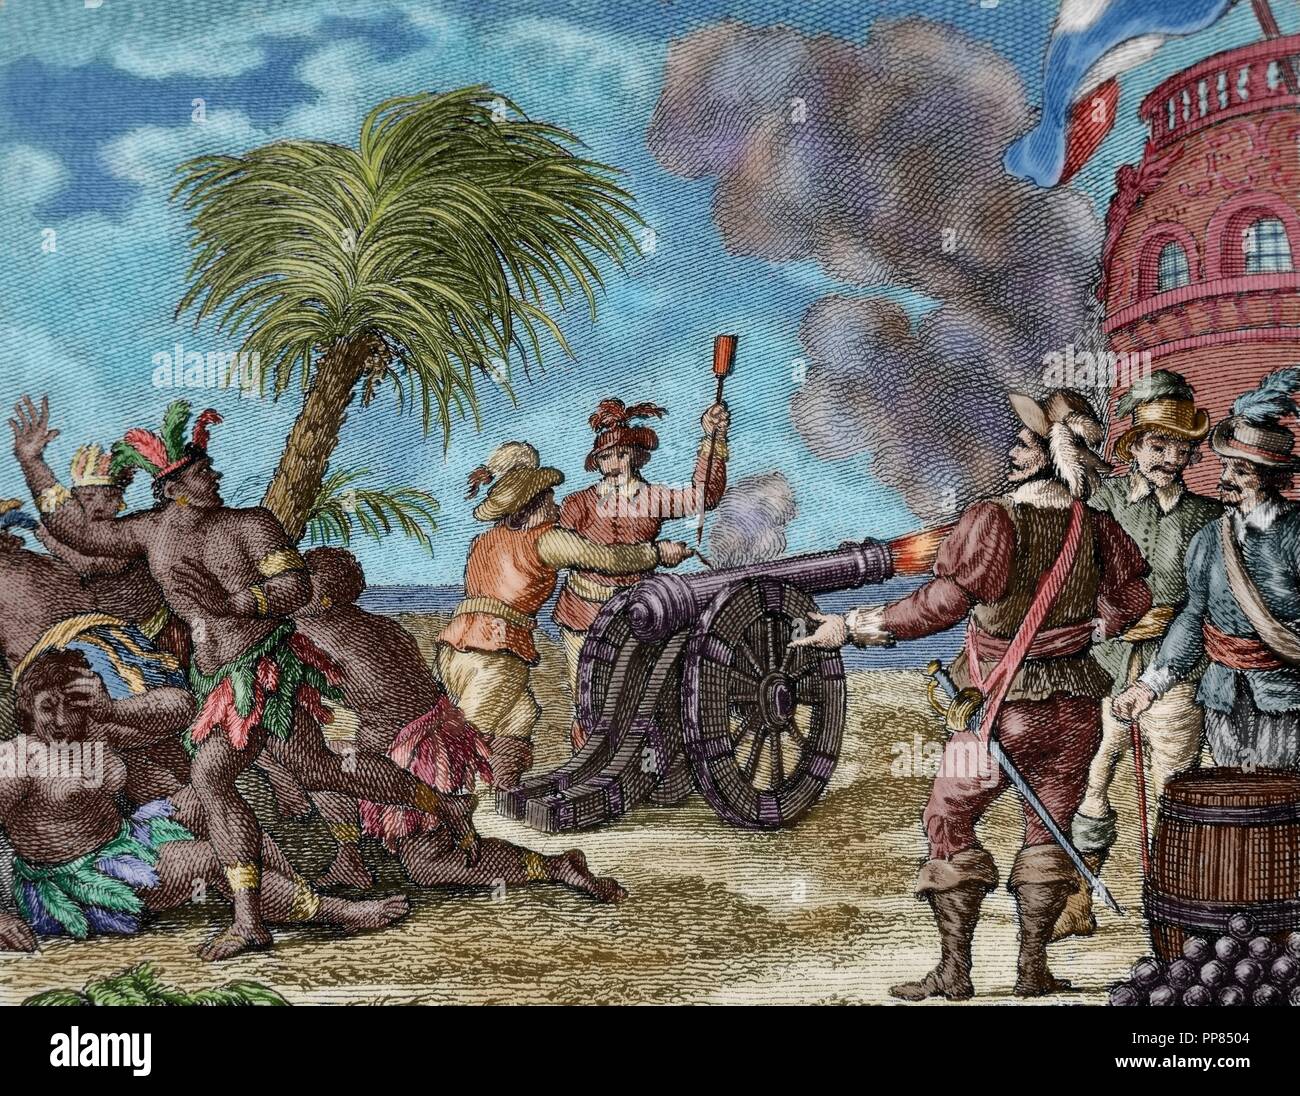 Tierra del Fuego. The ruler of the natives of the Hornos island, along with the Dutch Willem Cornelisz Schouten and Jacob Le Maire, is surprised by the firing of a cannon. Engraving, 1807. Colored. Stock Photo